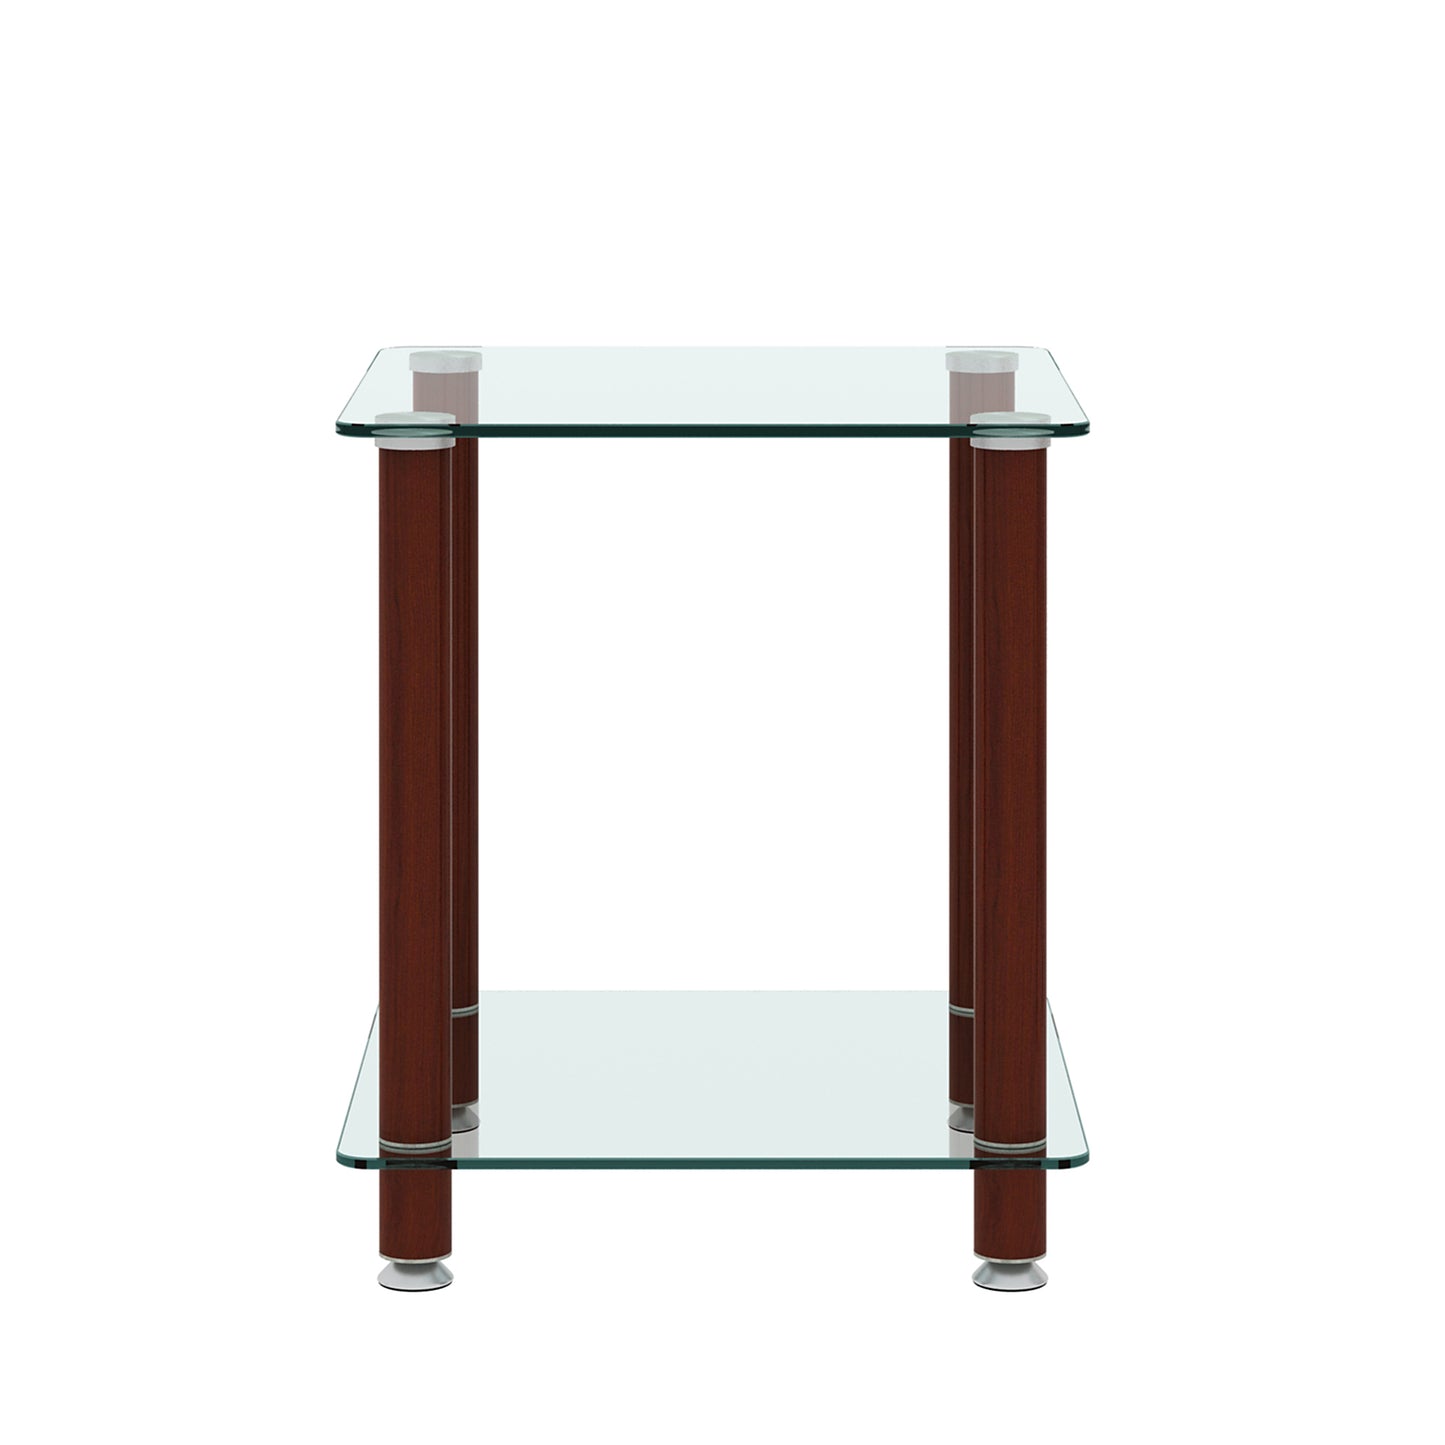 1. Clear+Walnut Table2. TierEnd Table